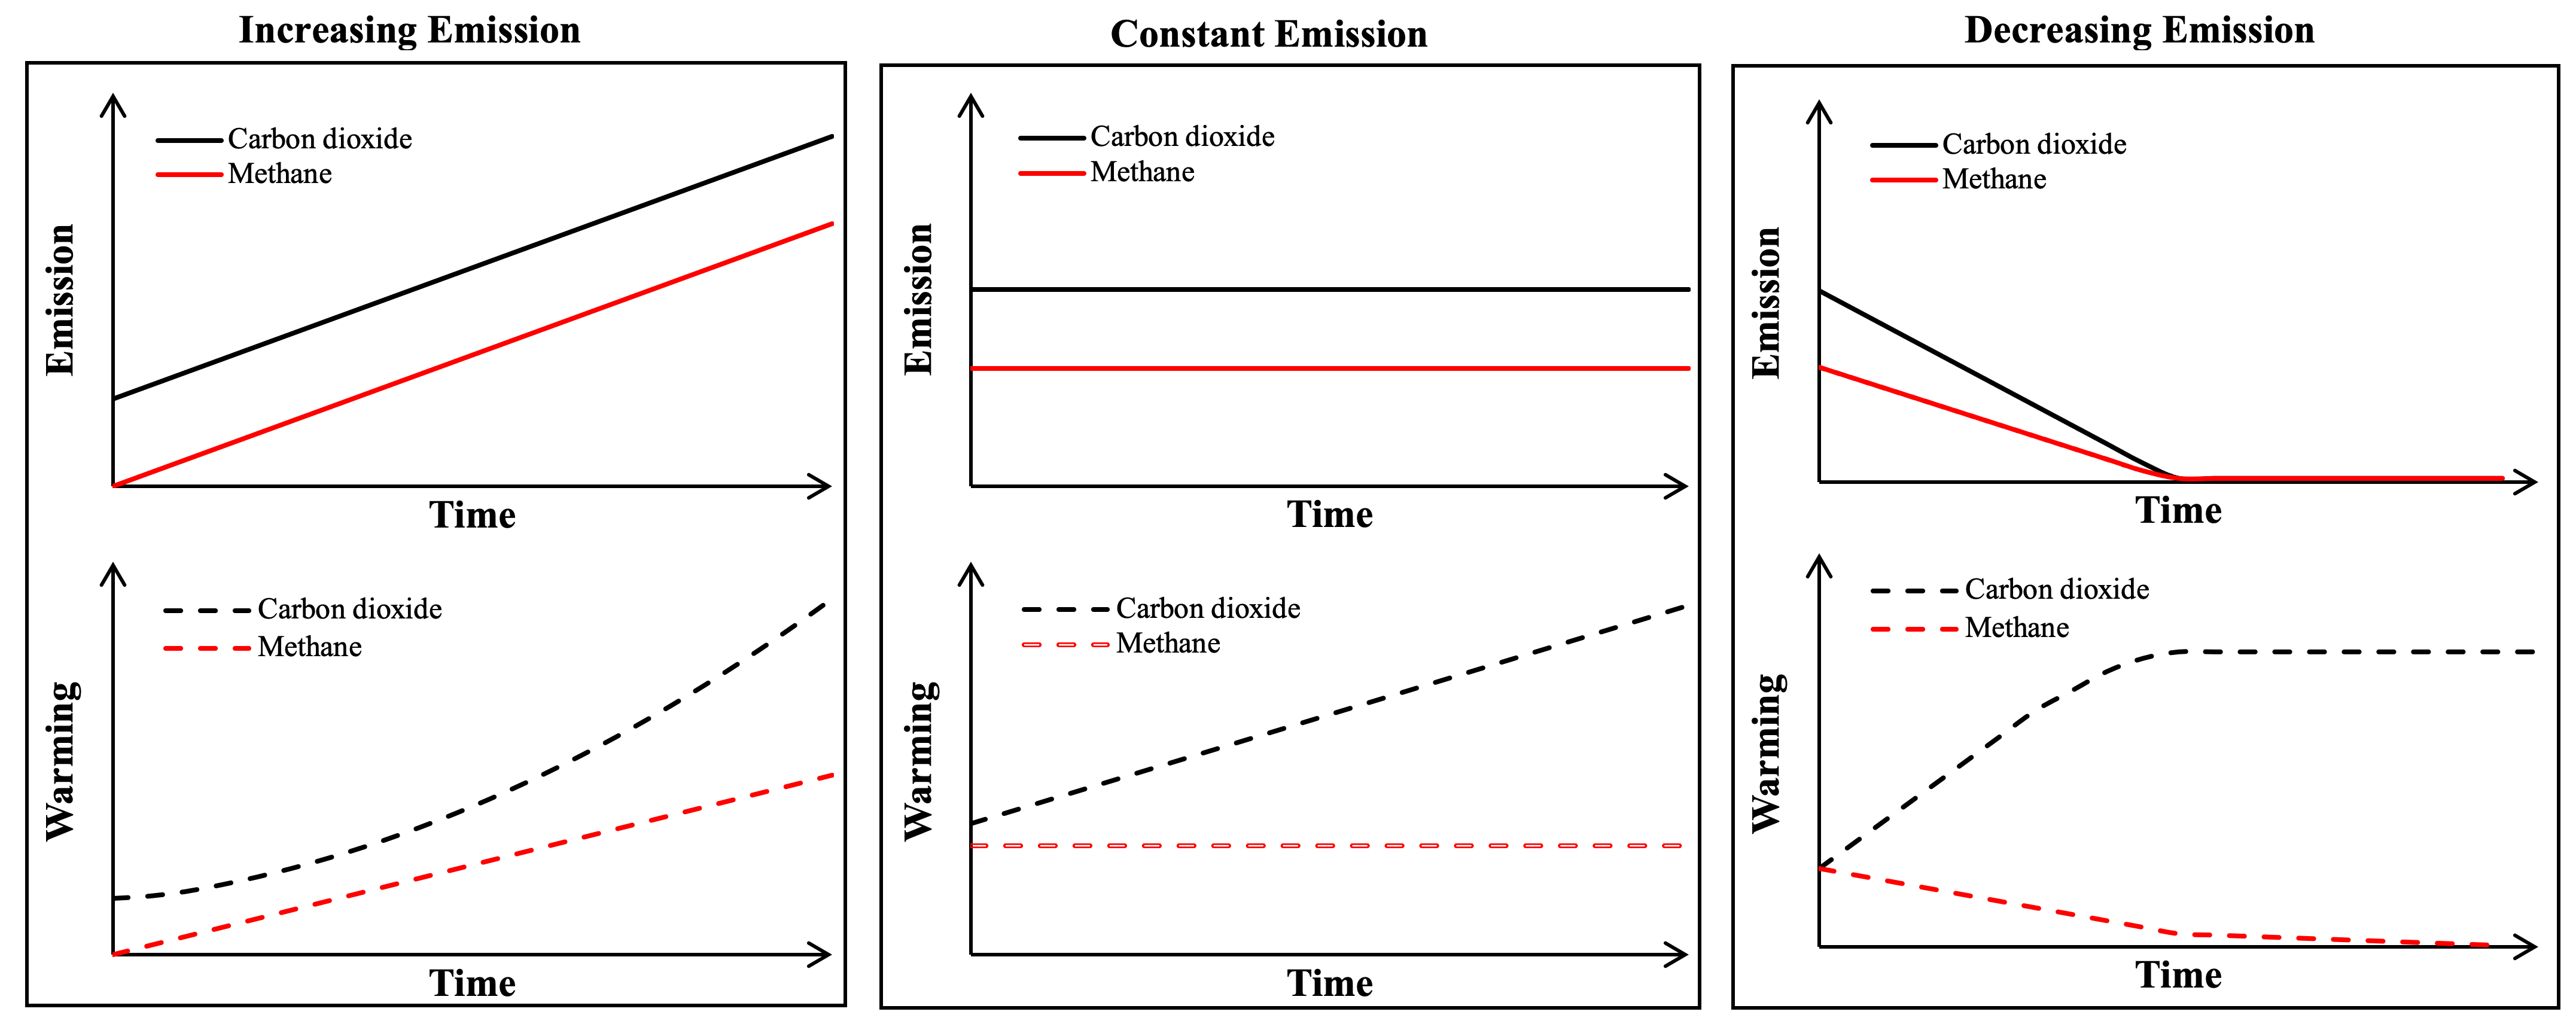 Figure 1. Figure adapted from the briefing, “Climate metrics under ambitious mitigation,” by University of Oxford Researchers Dr. Myles Allen and Dr. Michelle Cain. 